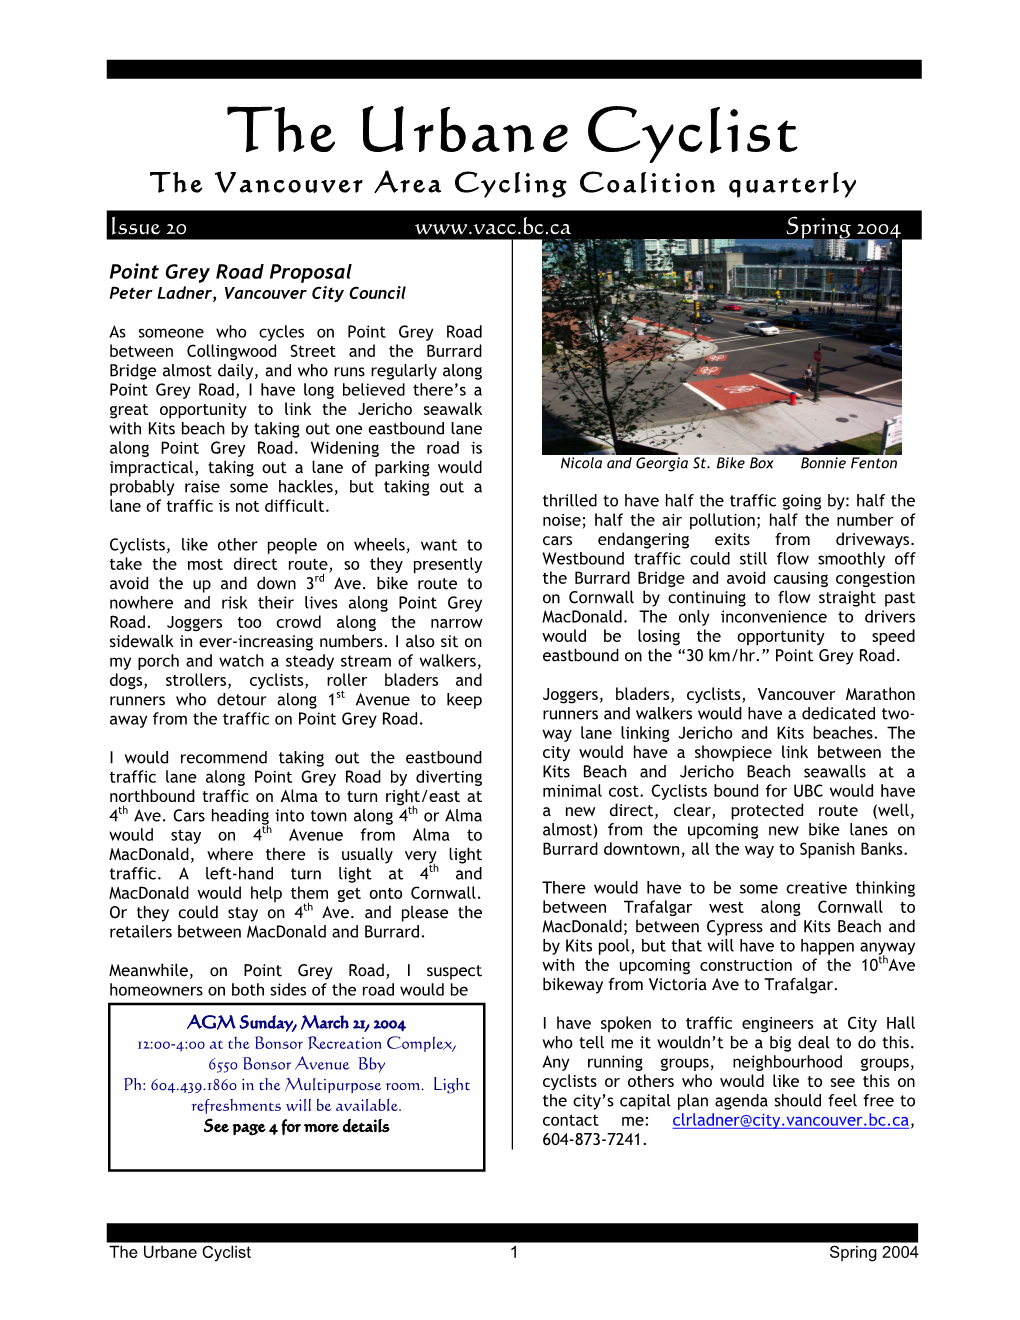 The Urbane Cyclist the Vancouver Area Cycling Coalition Quarterly